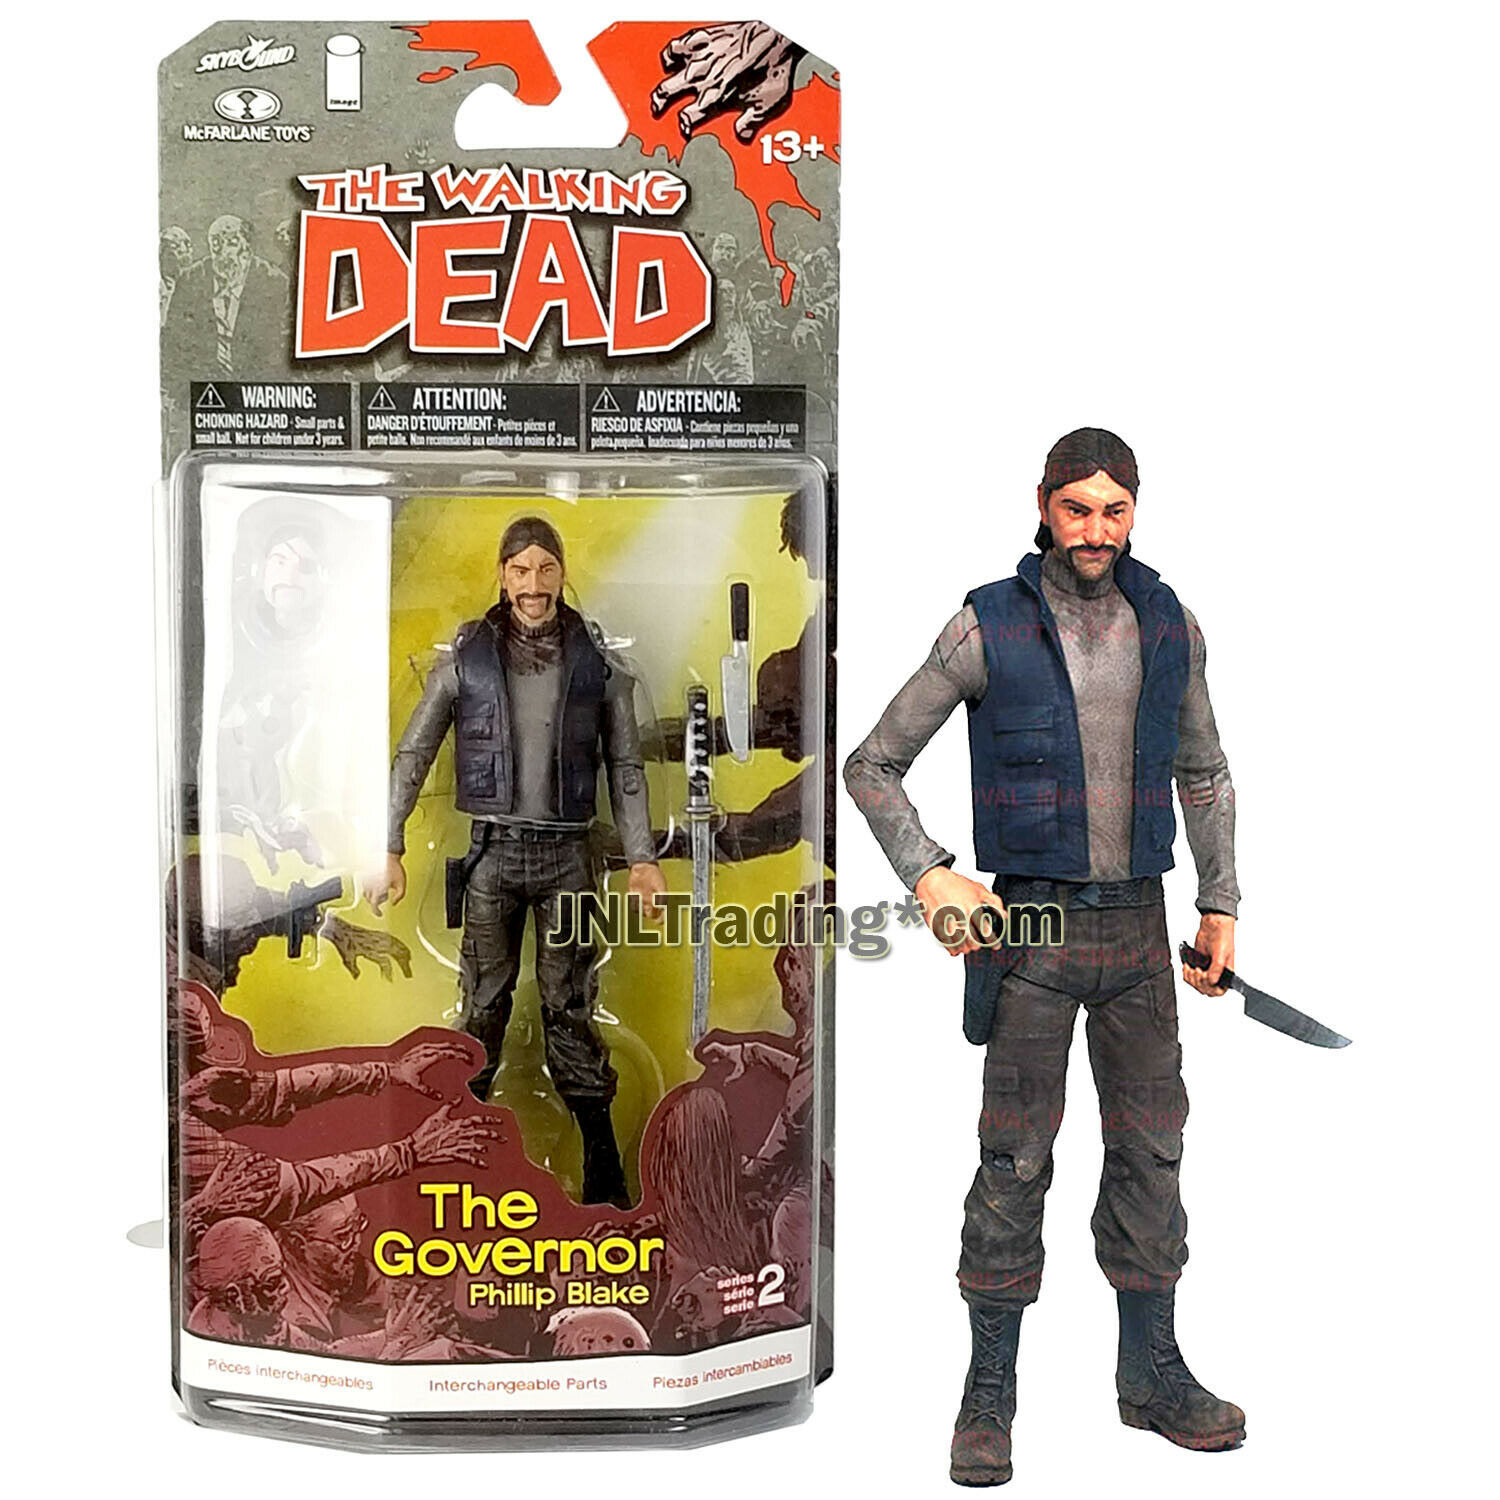 Year 2013 AMC TV Series Walking Dead 5 Inch Figure - THE GOVERNOR PHILLIP BLAKE - $24.99